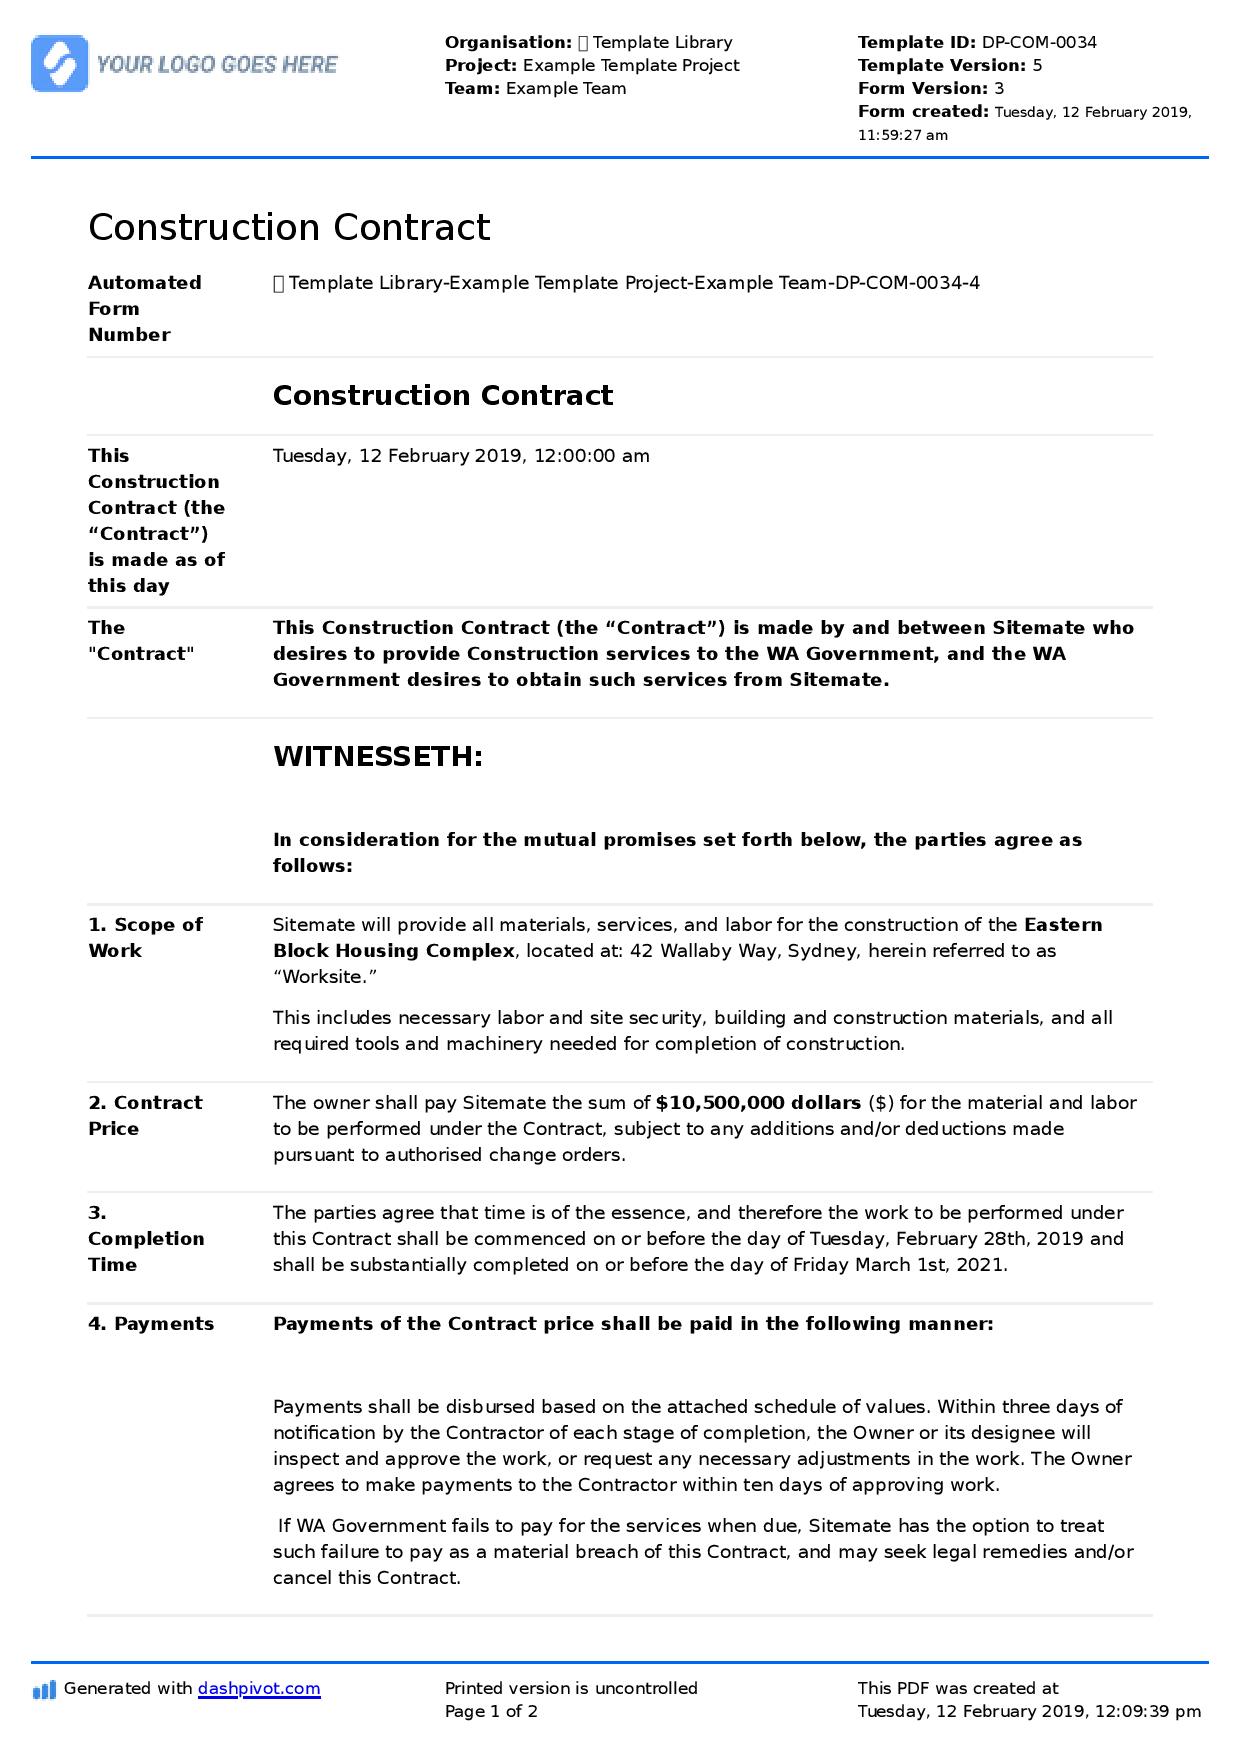 Construction Contracts Hinze Pdf To Word